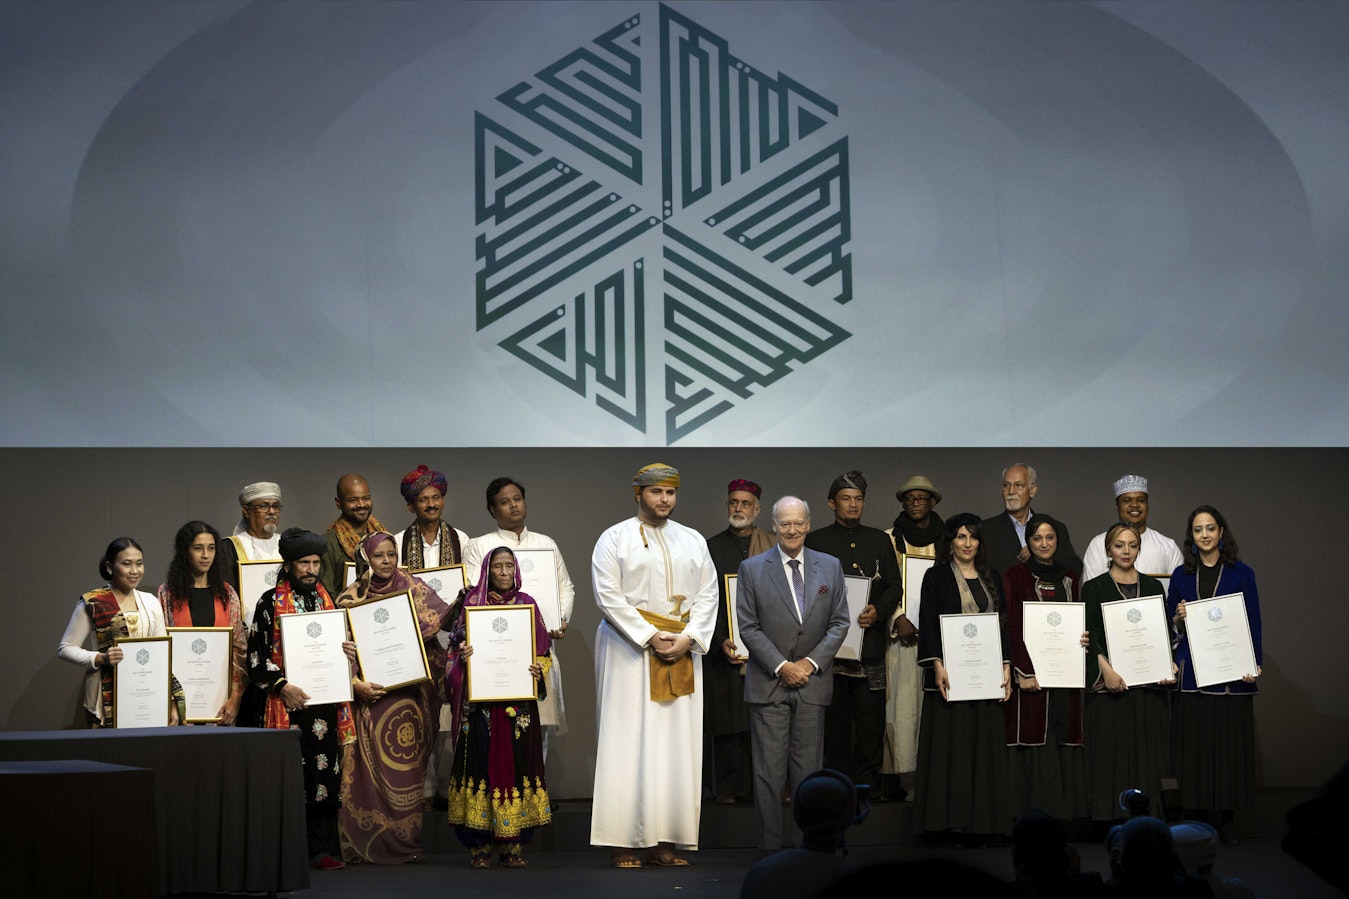 The 2022 Aga Khan Music Awards have concluded with the presentation of awards to 15 laureates by His Highness Sayyid Bilarab bin Haitham Al Said and Prince Amyn Aga Khan during a gala concert at Royal Opera House Muscat’s House of Musical Arts.| AKDN / Akbar Hakim